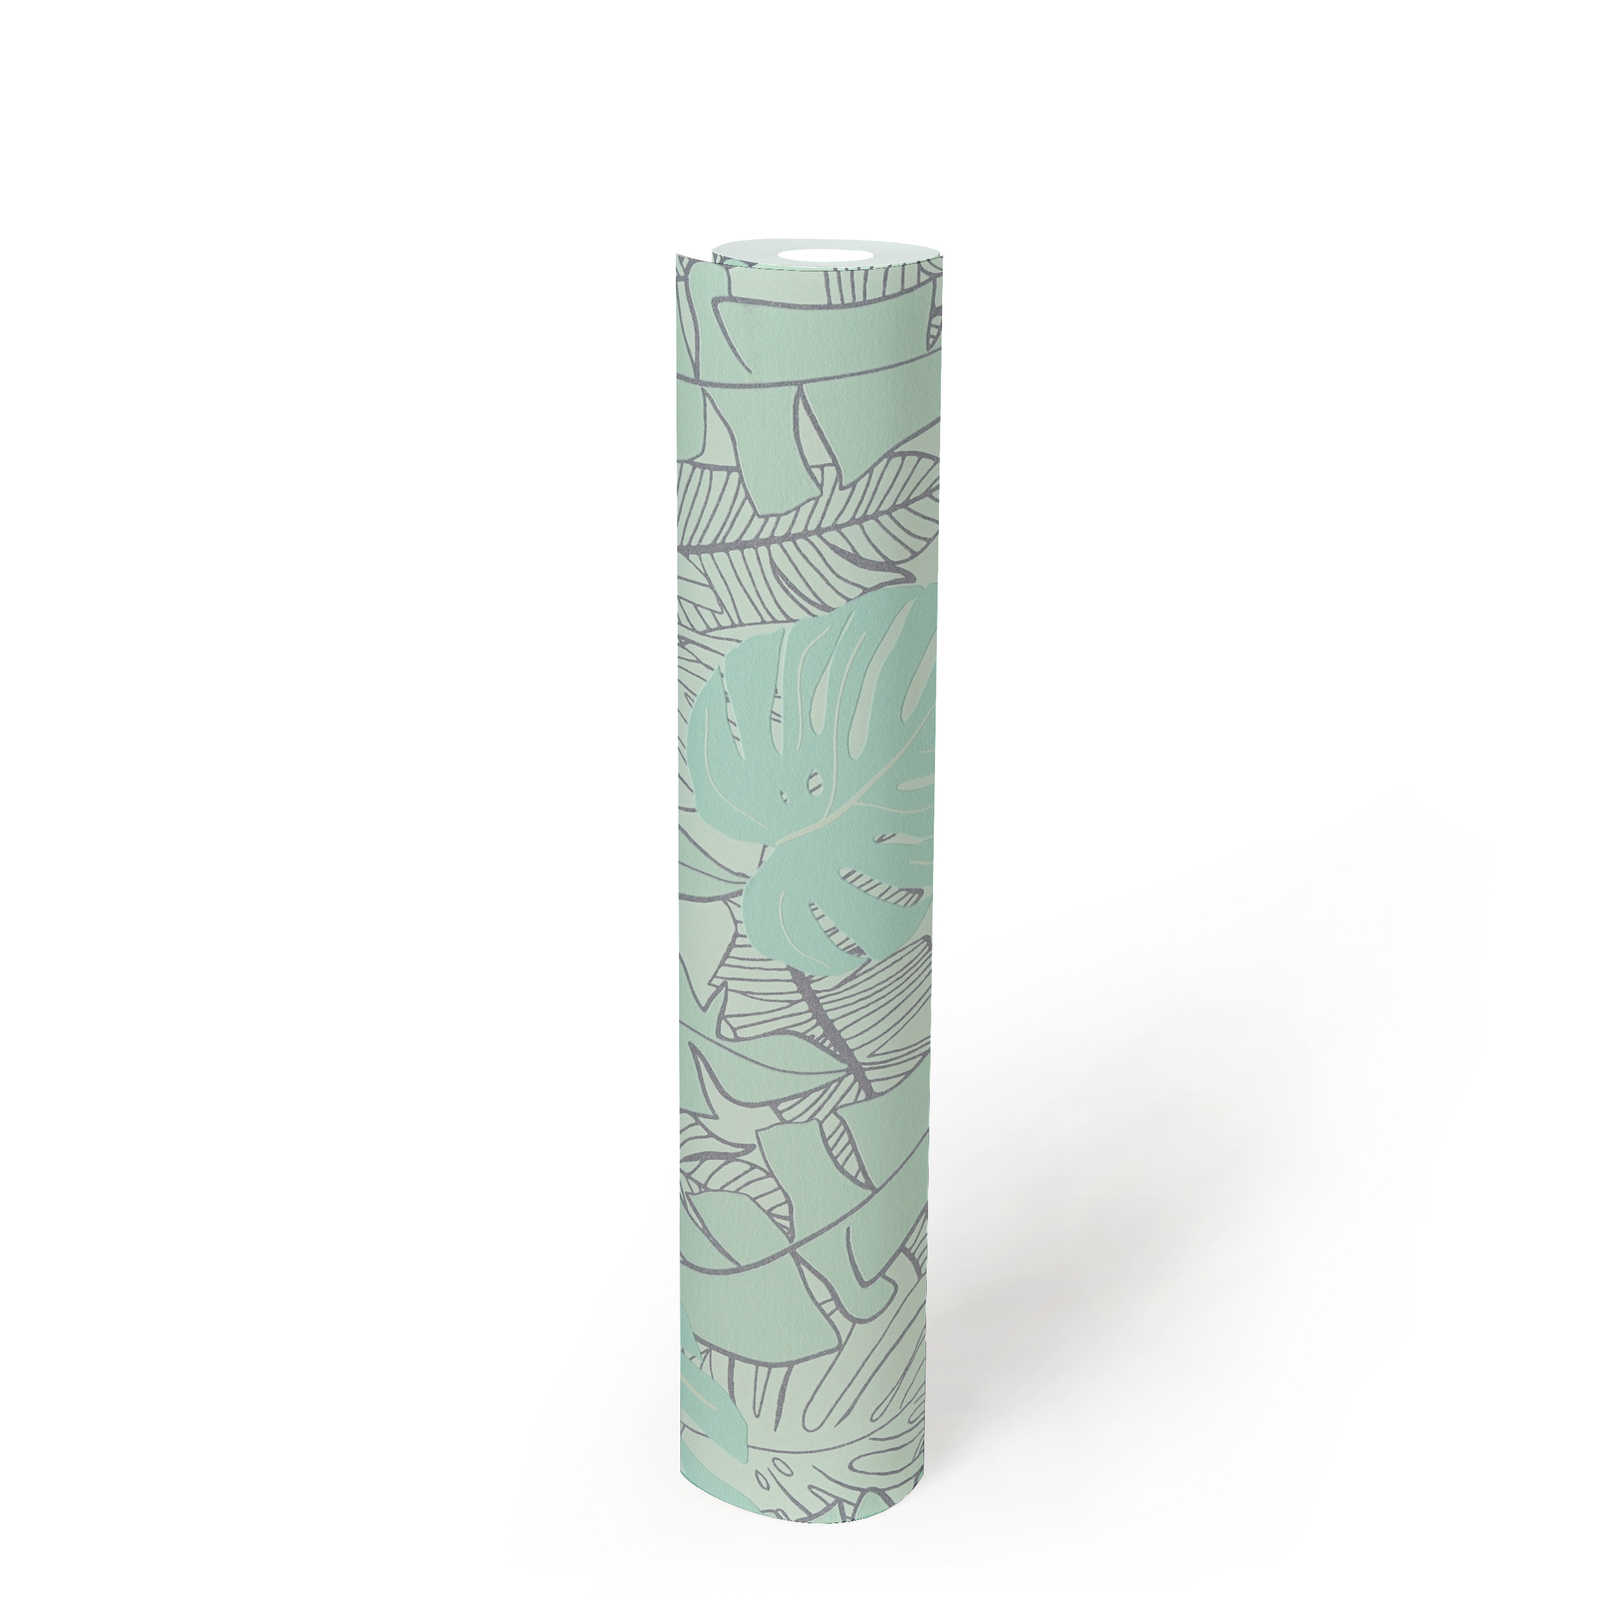             Pastel non-woven wallpaper with banana leaves & glossy effect - mint, green, metallic
        